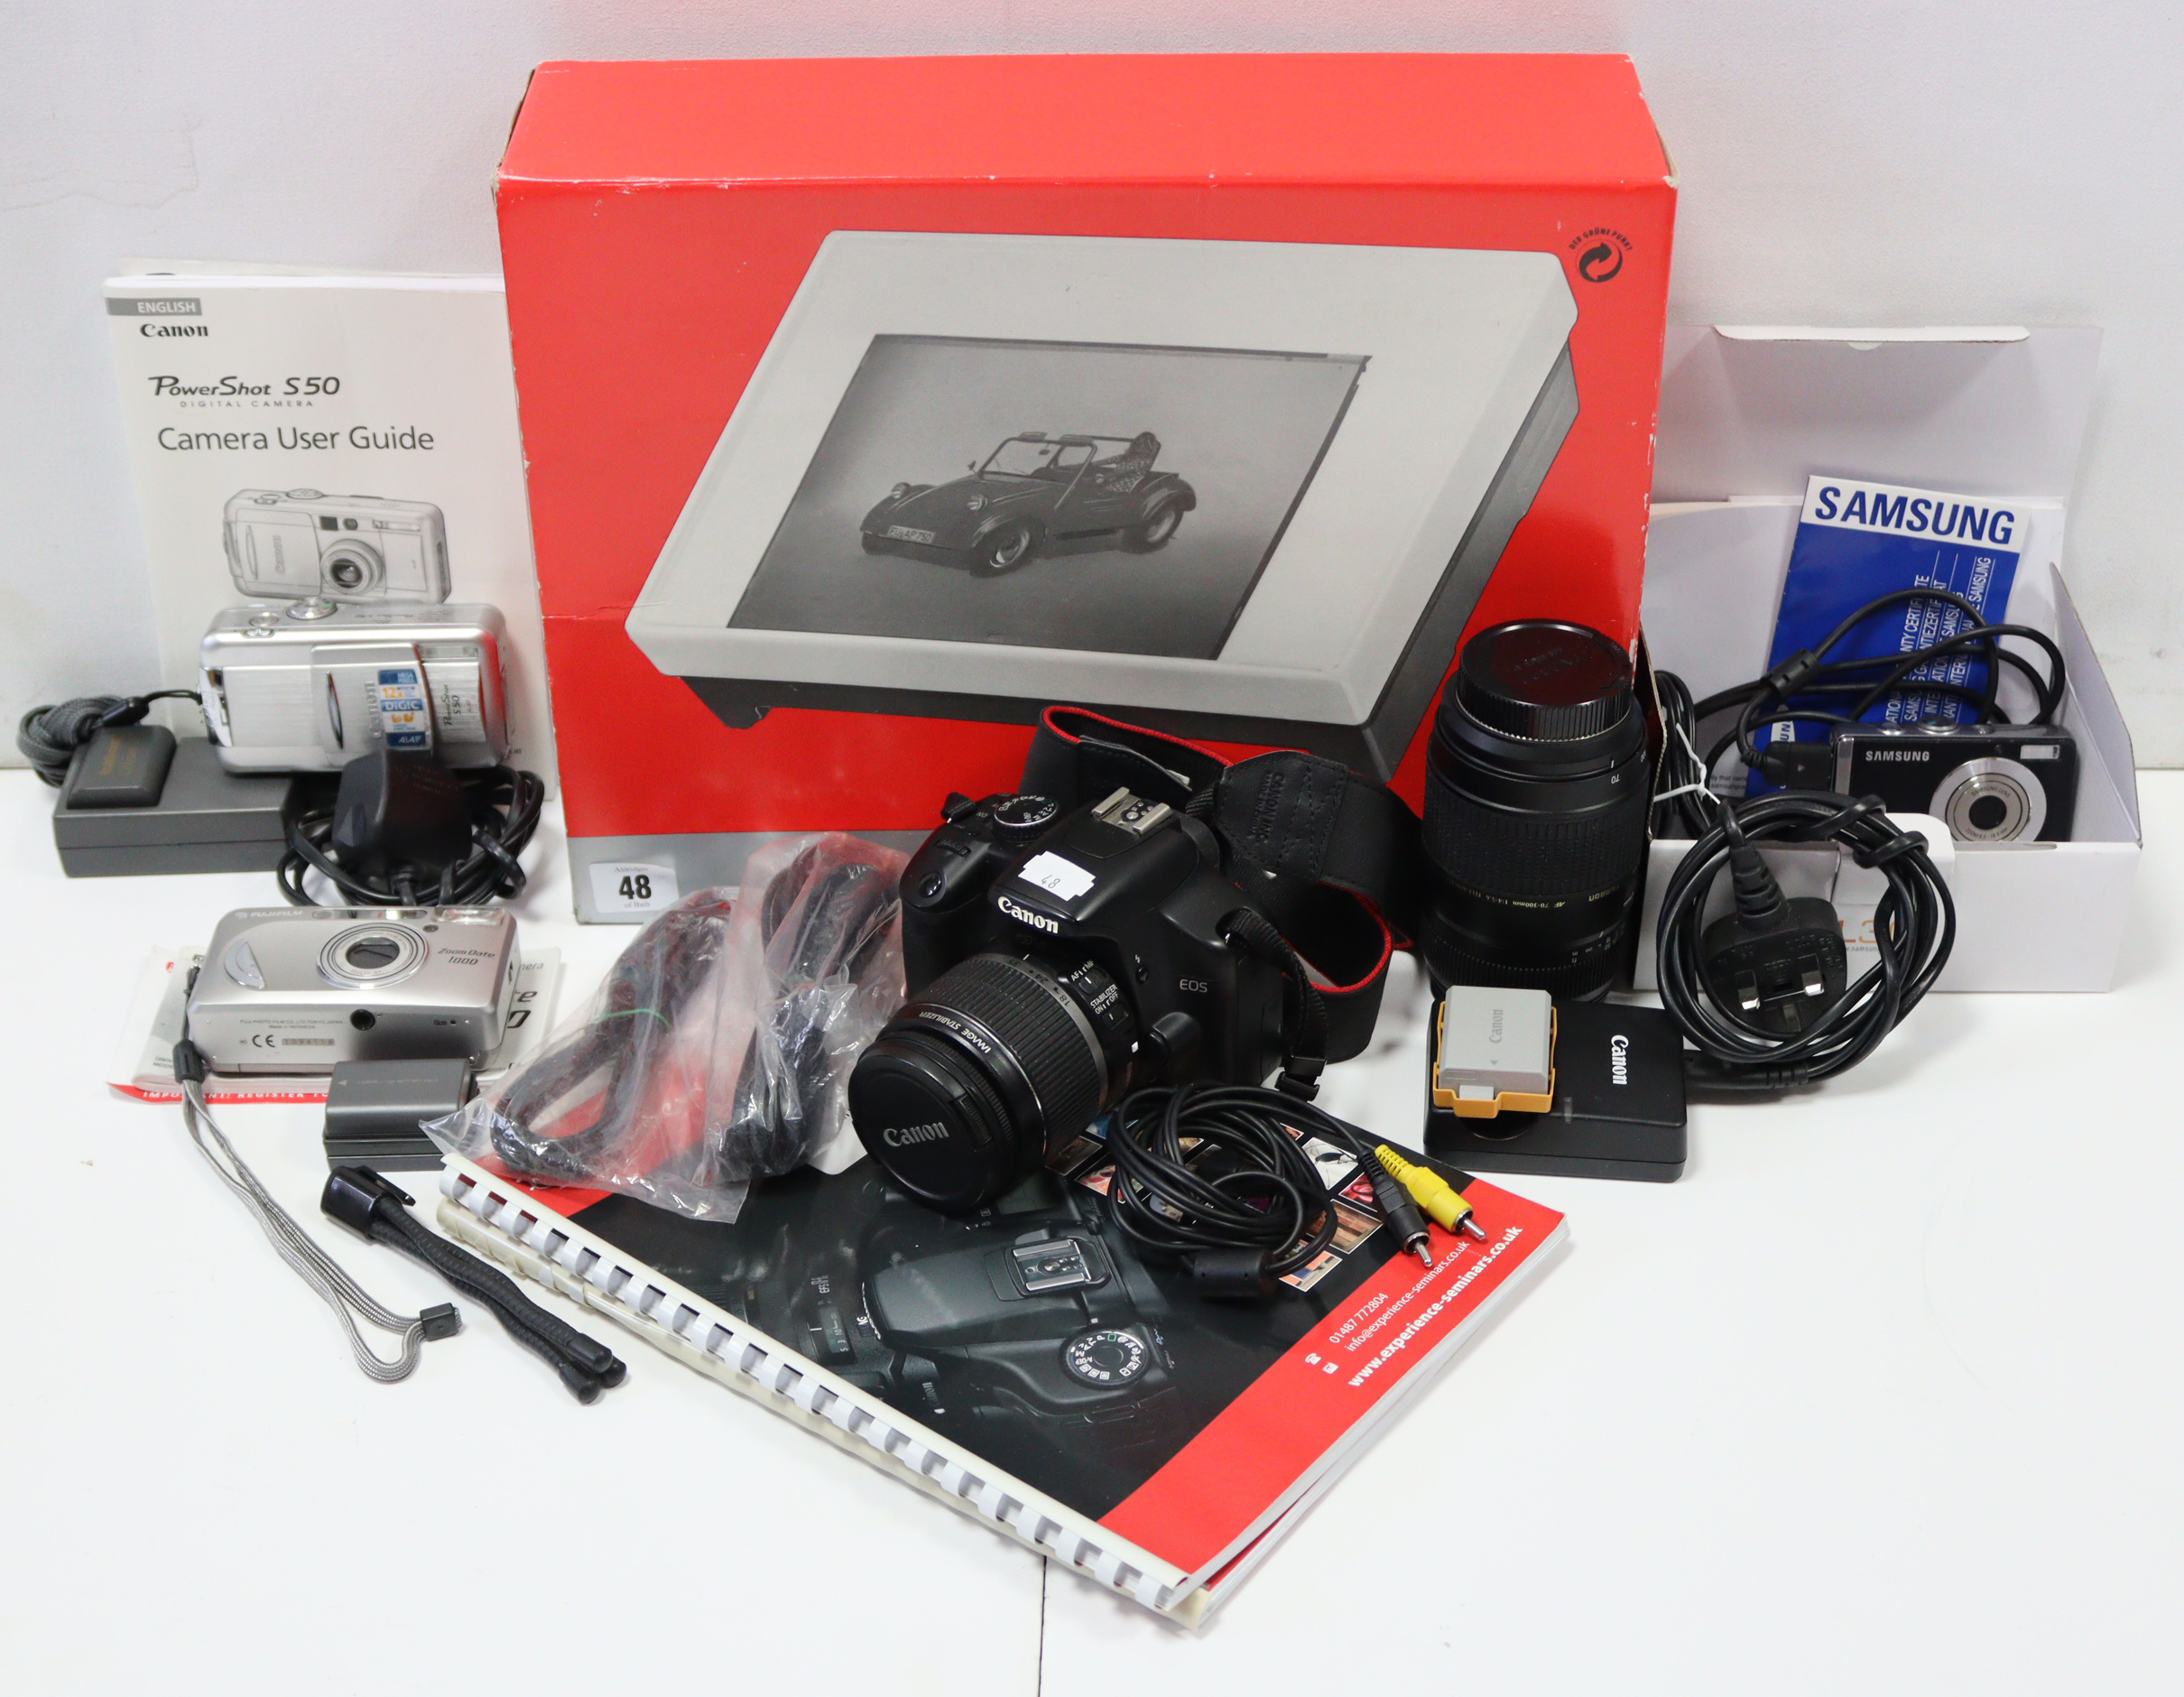 A Canon “EOS 450D” digital camera with lens; together with various other cameras; a light-box; & a